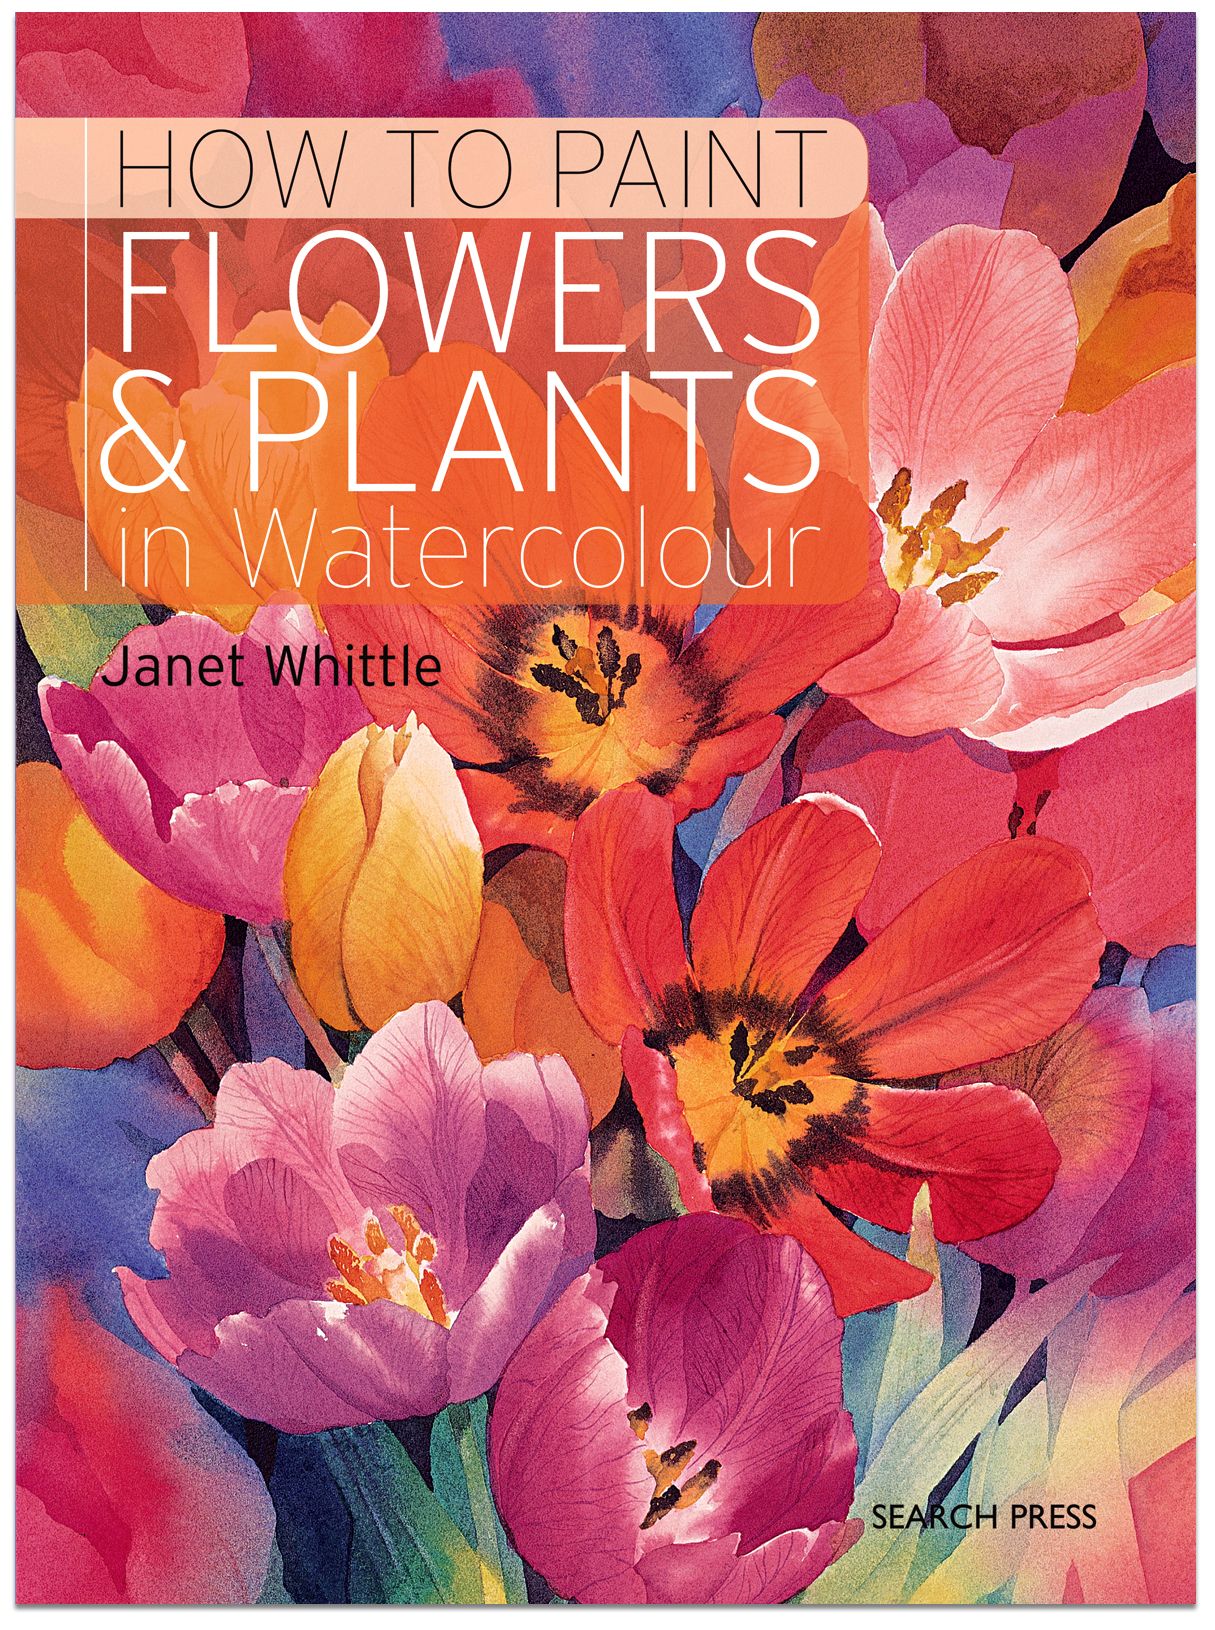 How to Paint Flowers & Plants in Watercolour